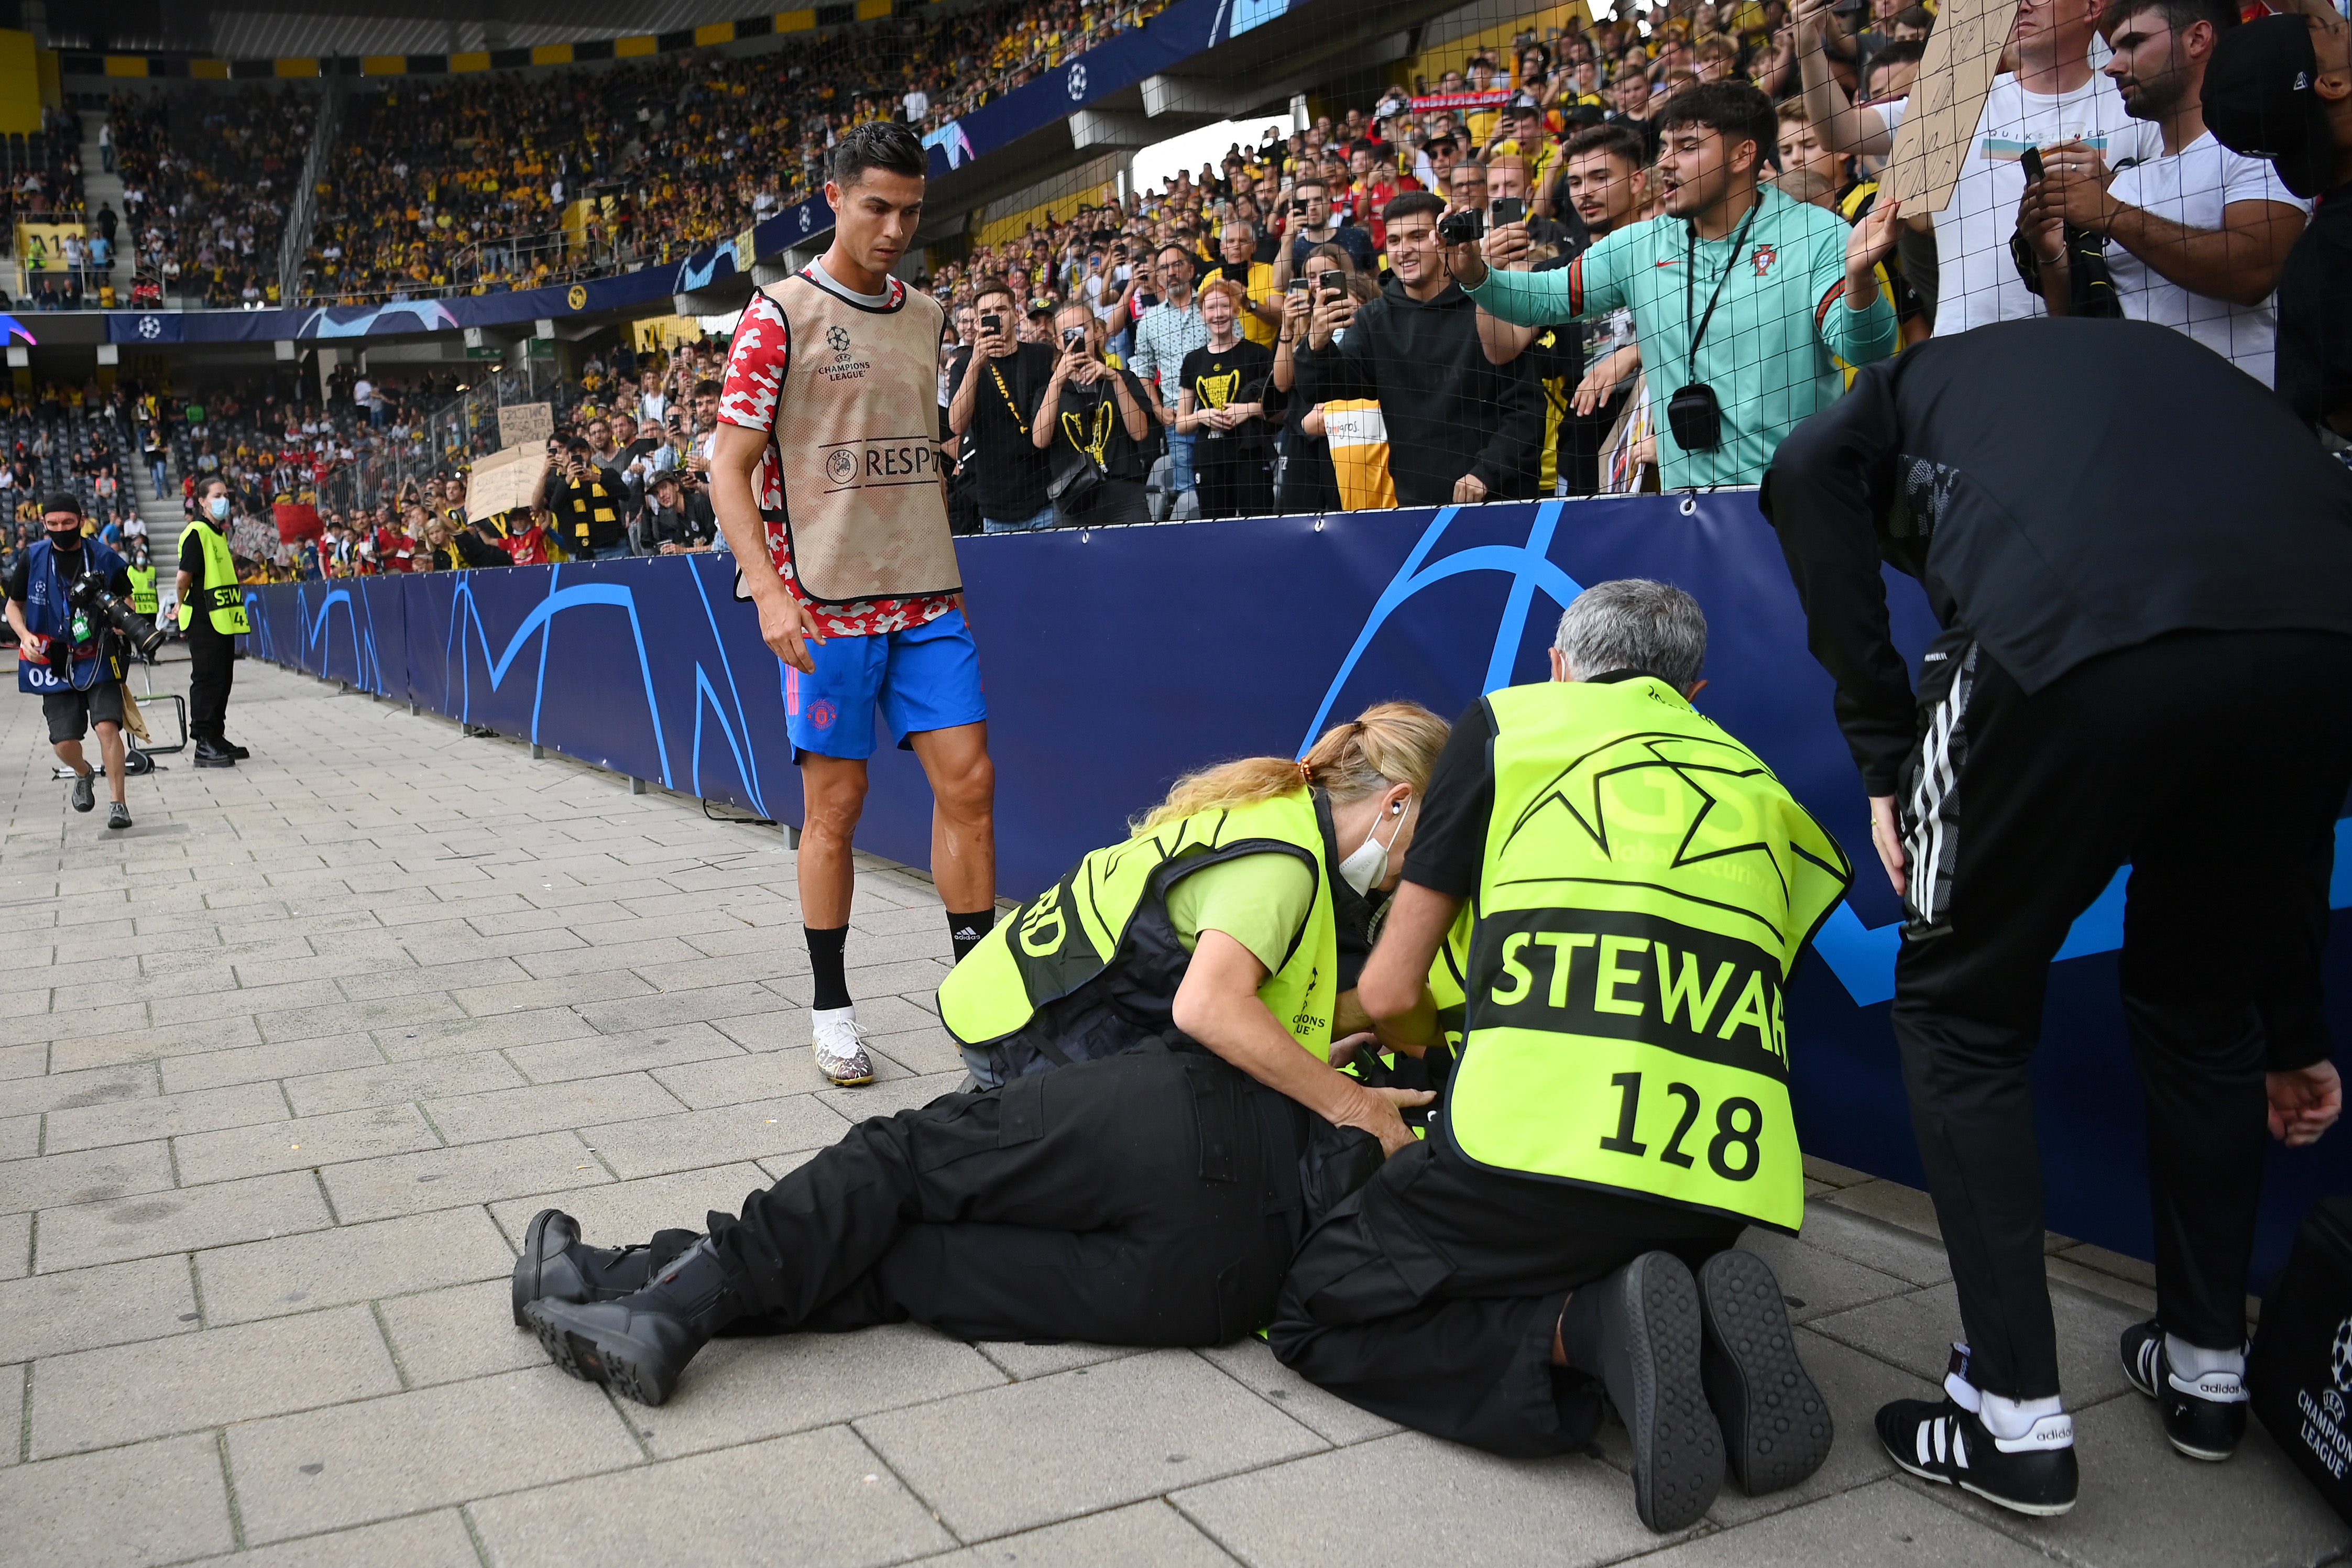 Cristiano Ronaldo struck a steward with a fierce shot during Manchester United’s warm-up